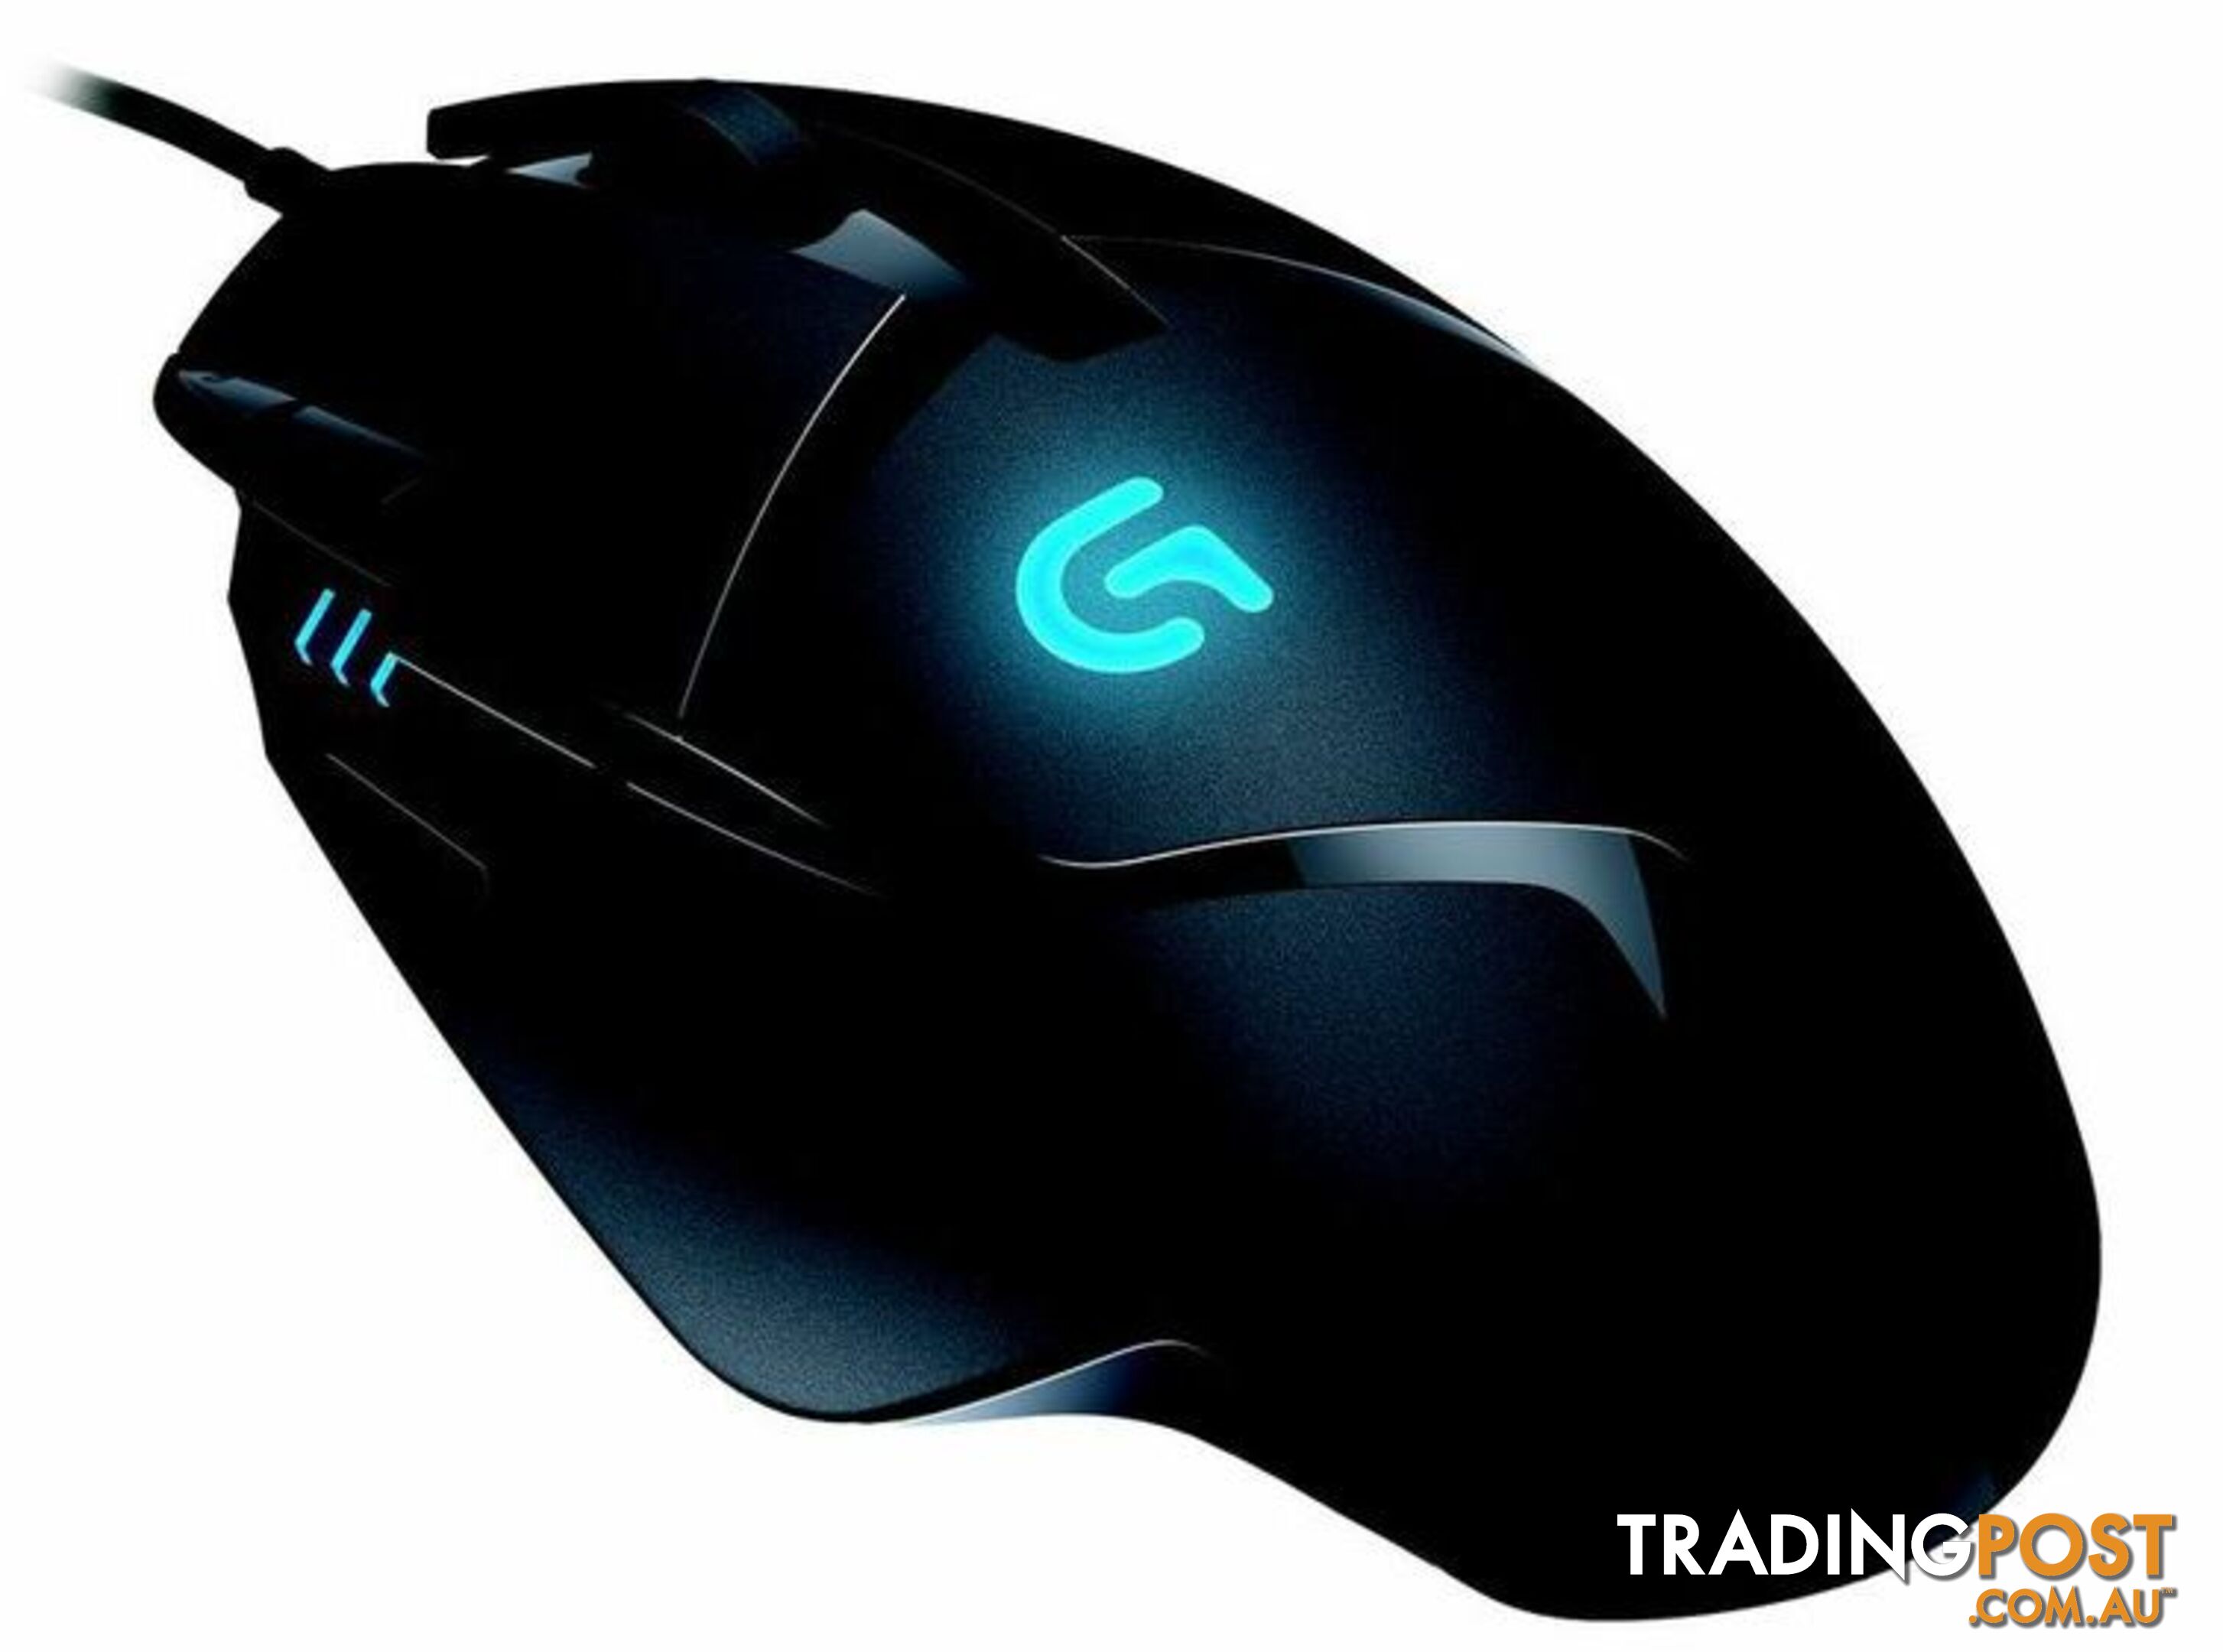 Logitech G402 Hyperion Fury FPS USB Gaming Mouse 8 Programmable Buttons 4000 DPI High Speed Super Fast 1ms Response Time - MILT-G402